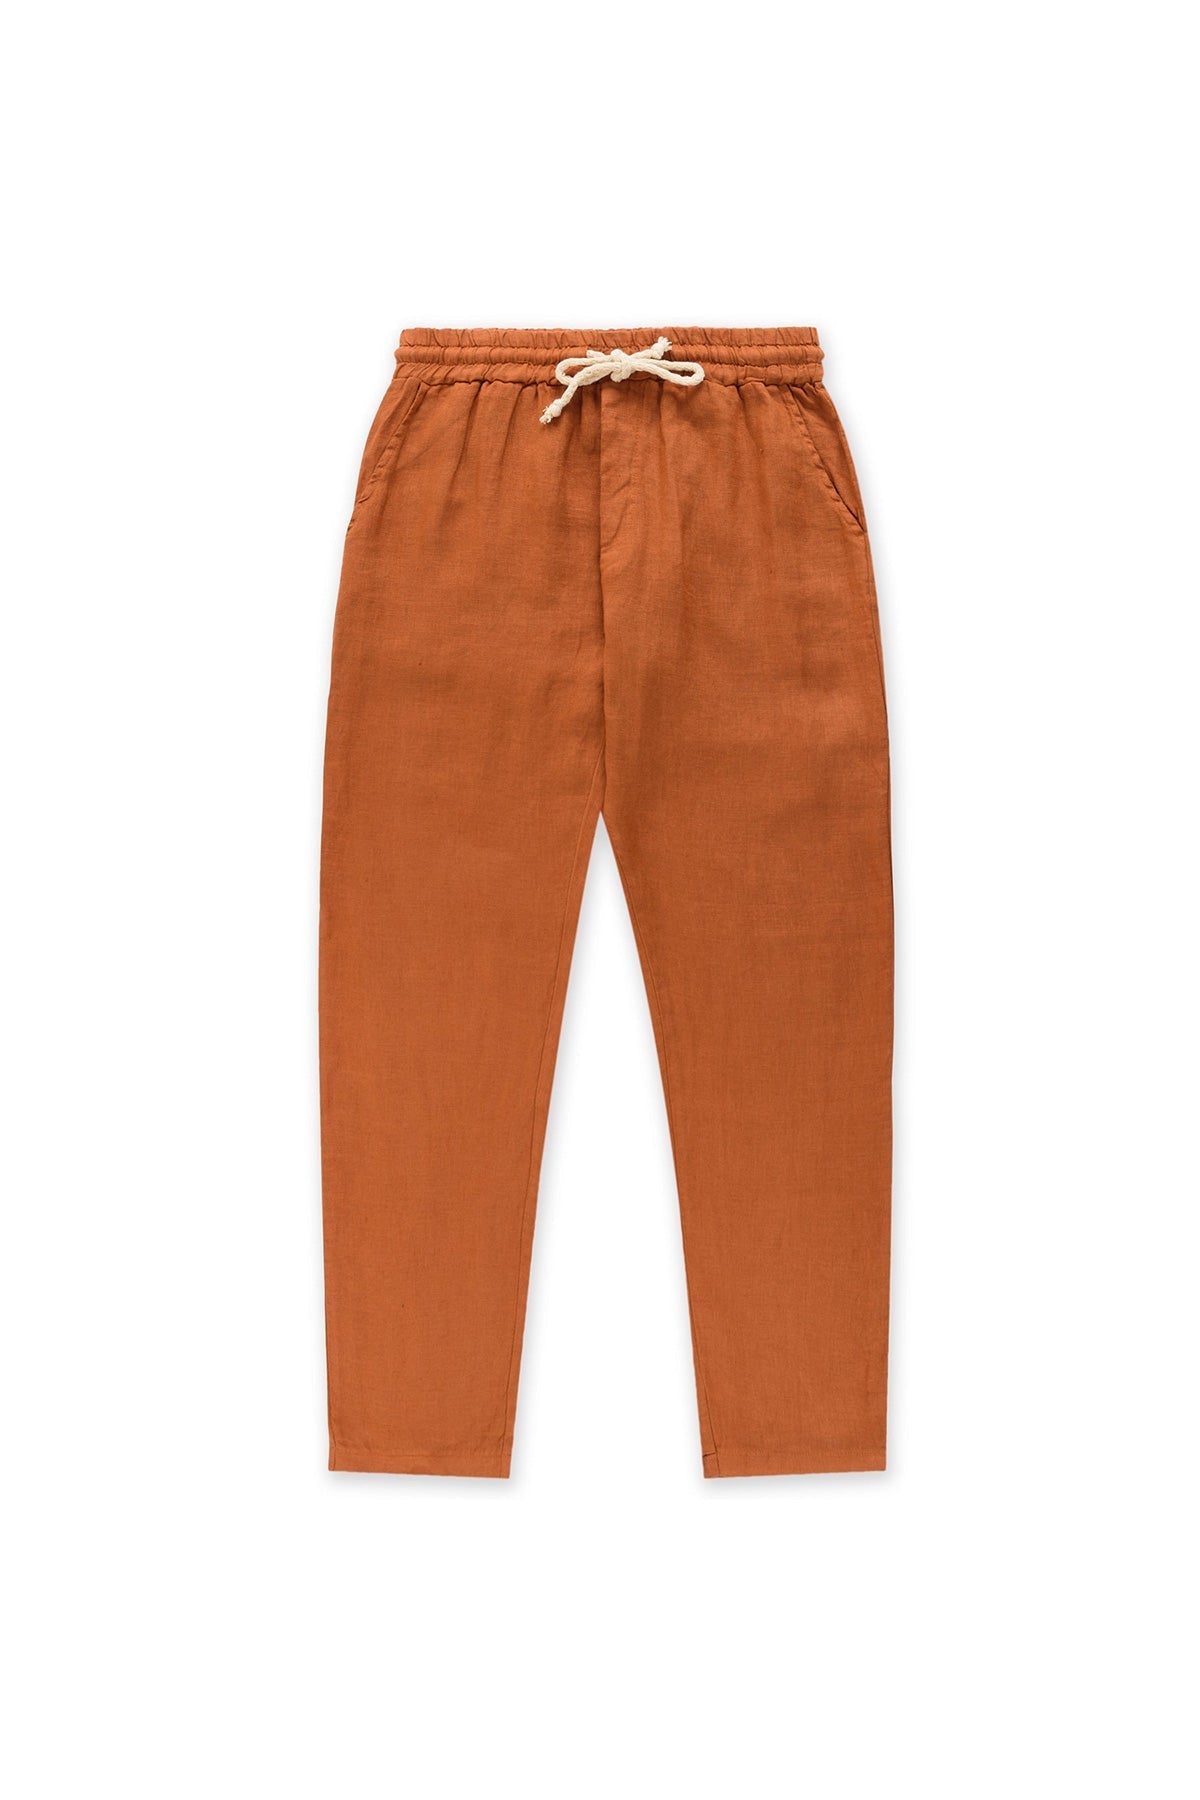 Clay Tailored Linen Pants - Polonio